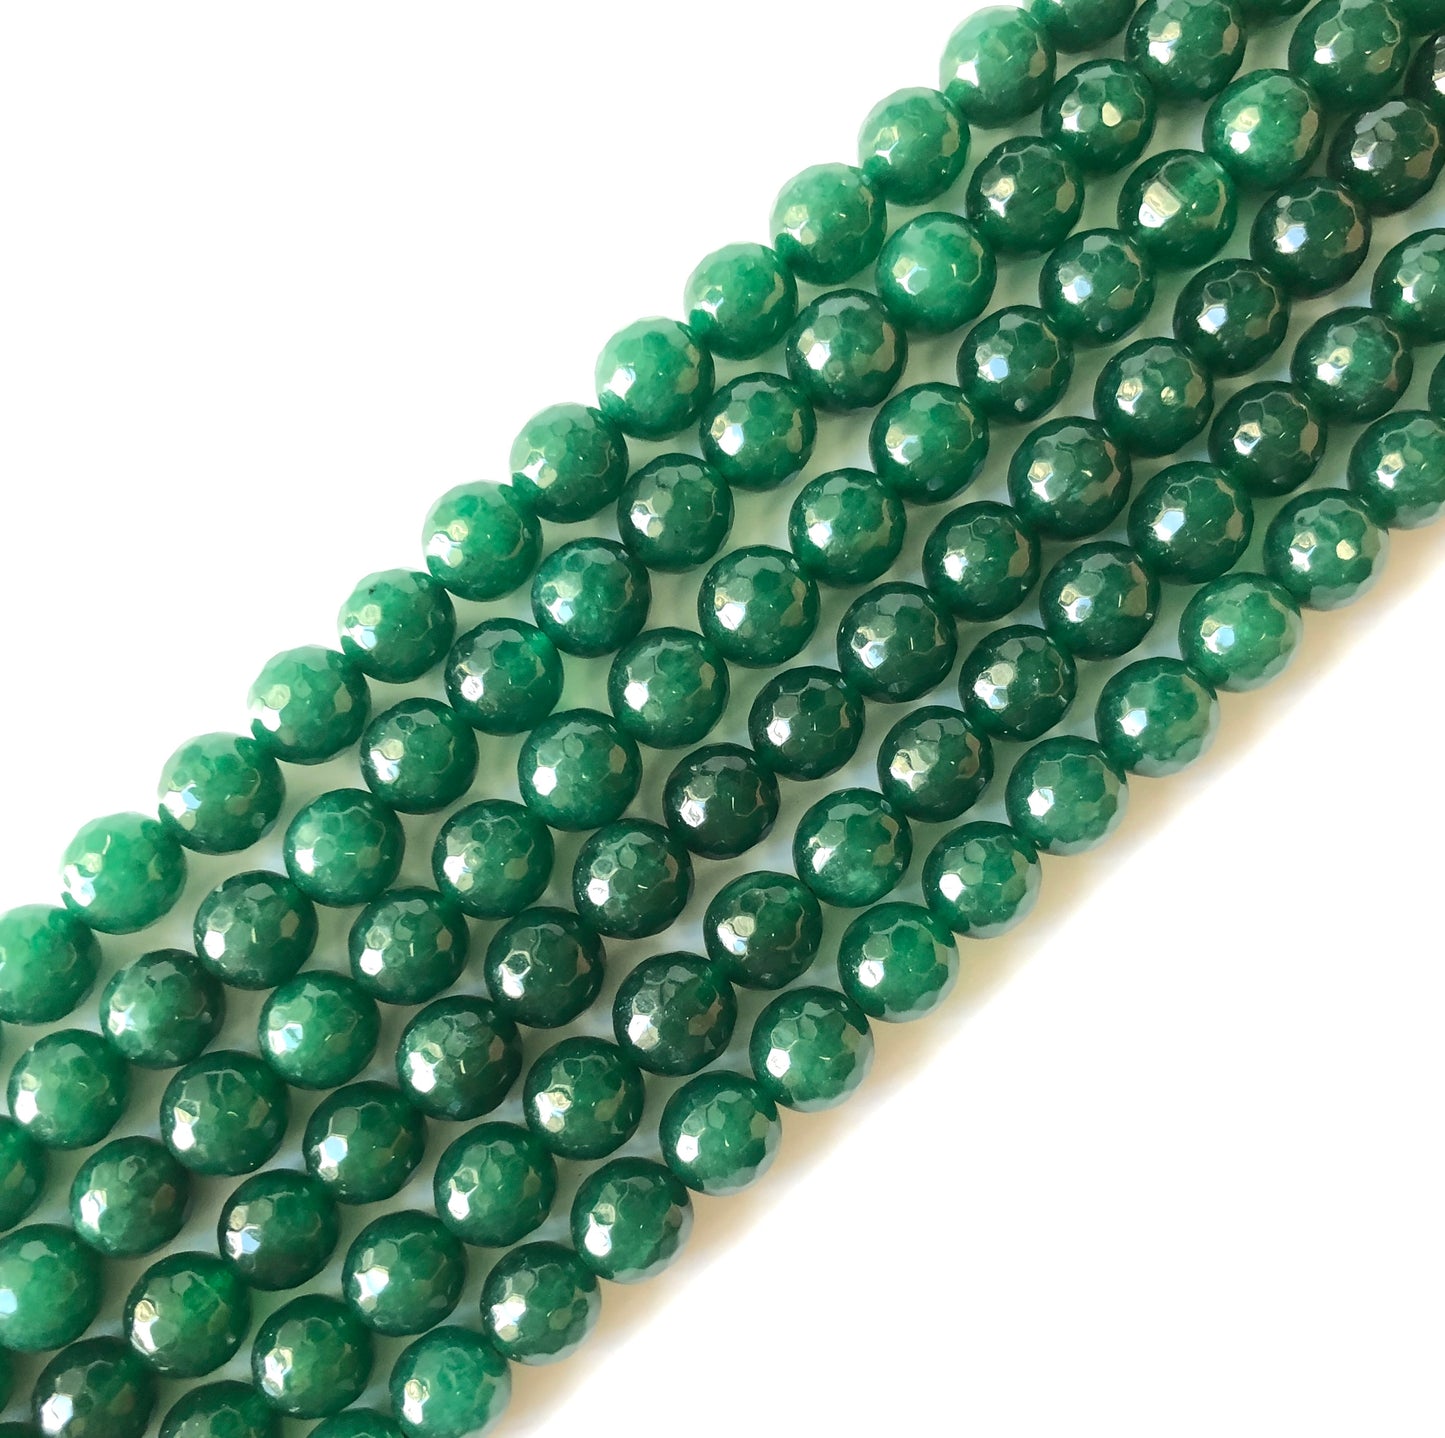 2 Strands/lot 10mm Yellow Green Red Black Jade Faceted Stone Beads for Black History Month Juneteenth Awareness Green Stone Beads Juneteenth & Black History Month Awareness New Beads Arrivals Round Jade Beads Charms Beads Beyond